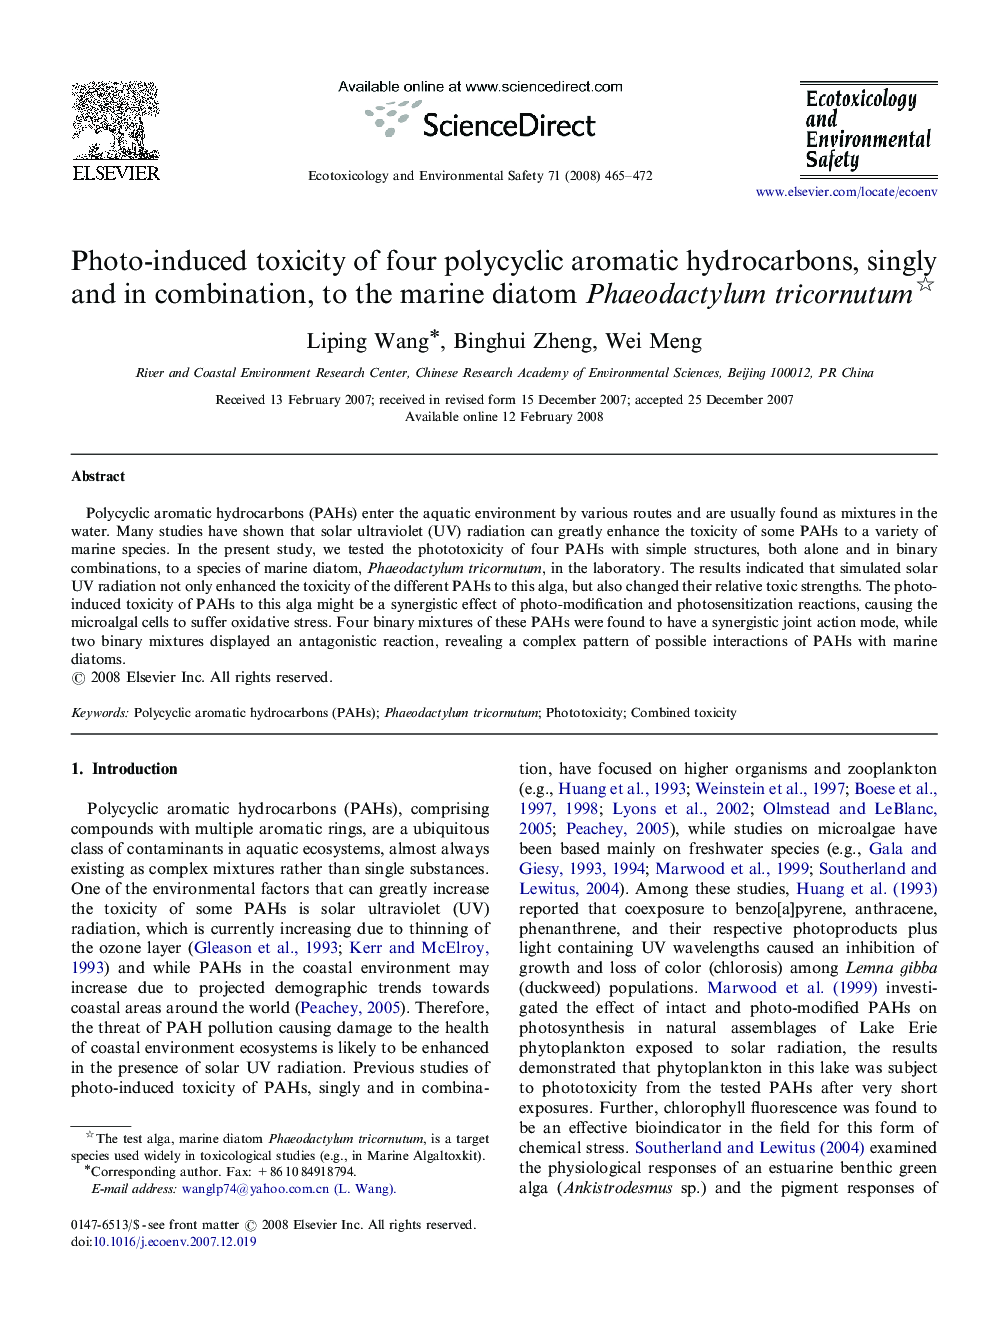 Photo-induced toxicity of four polycyclic aromatic hydrocarbons, singly and in combination, to the marine diatom Phaeodactylum tricornutum 